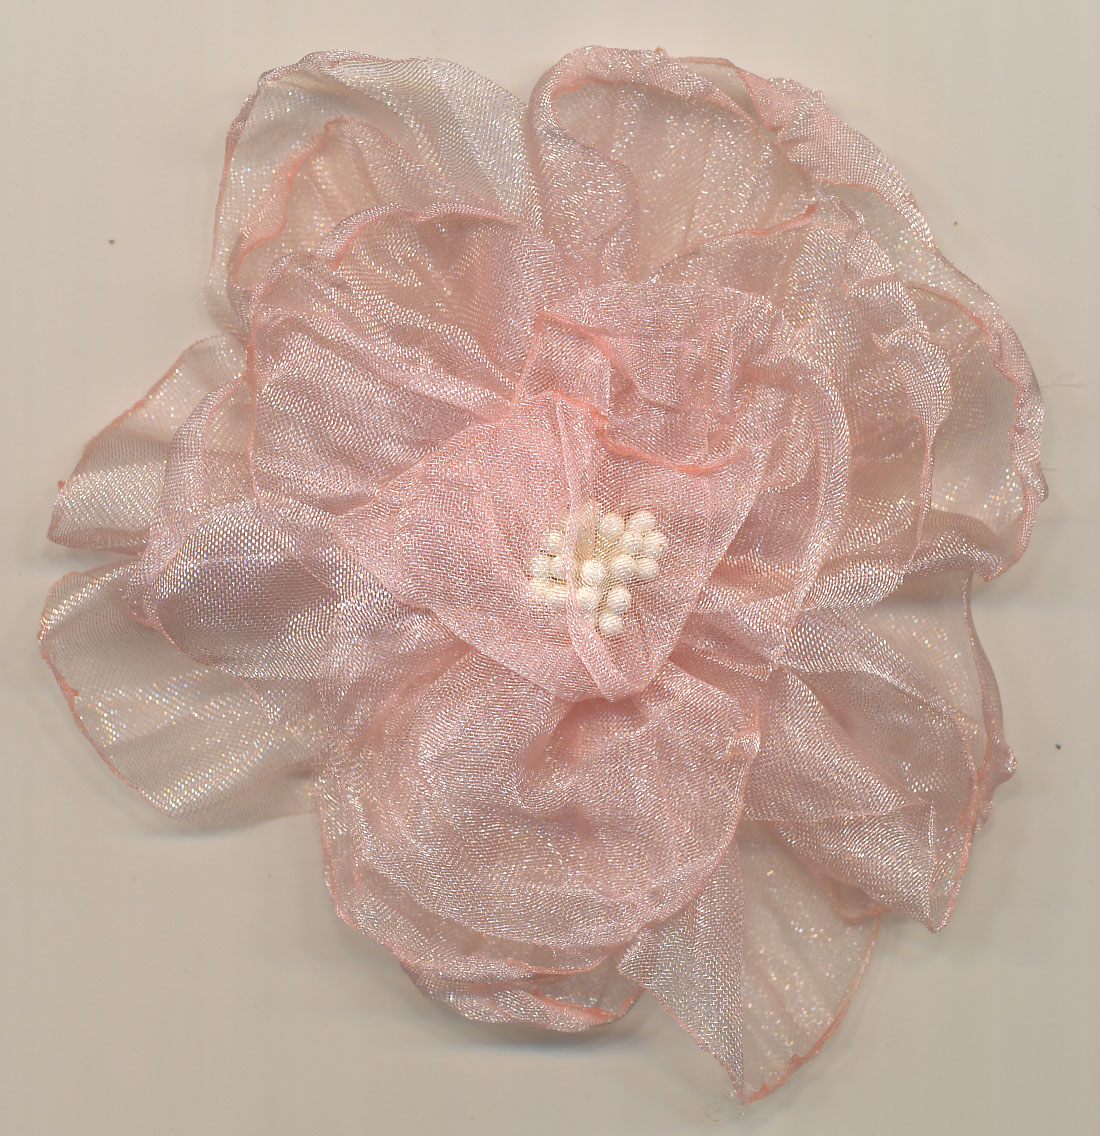 <font color="red">IN STOCK</font><br>3" Organza Pleated Flower with Seed Center-Rose/Off White